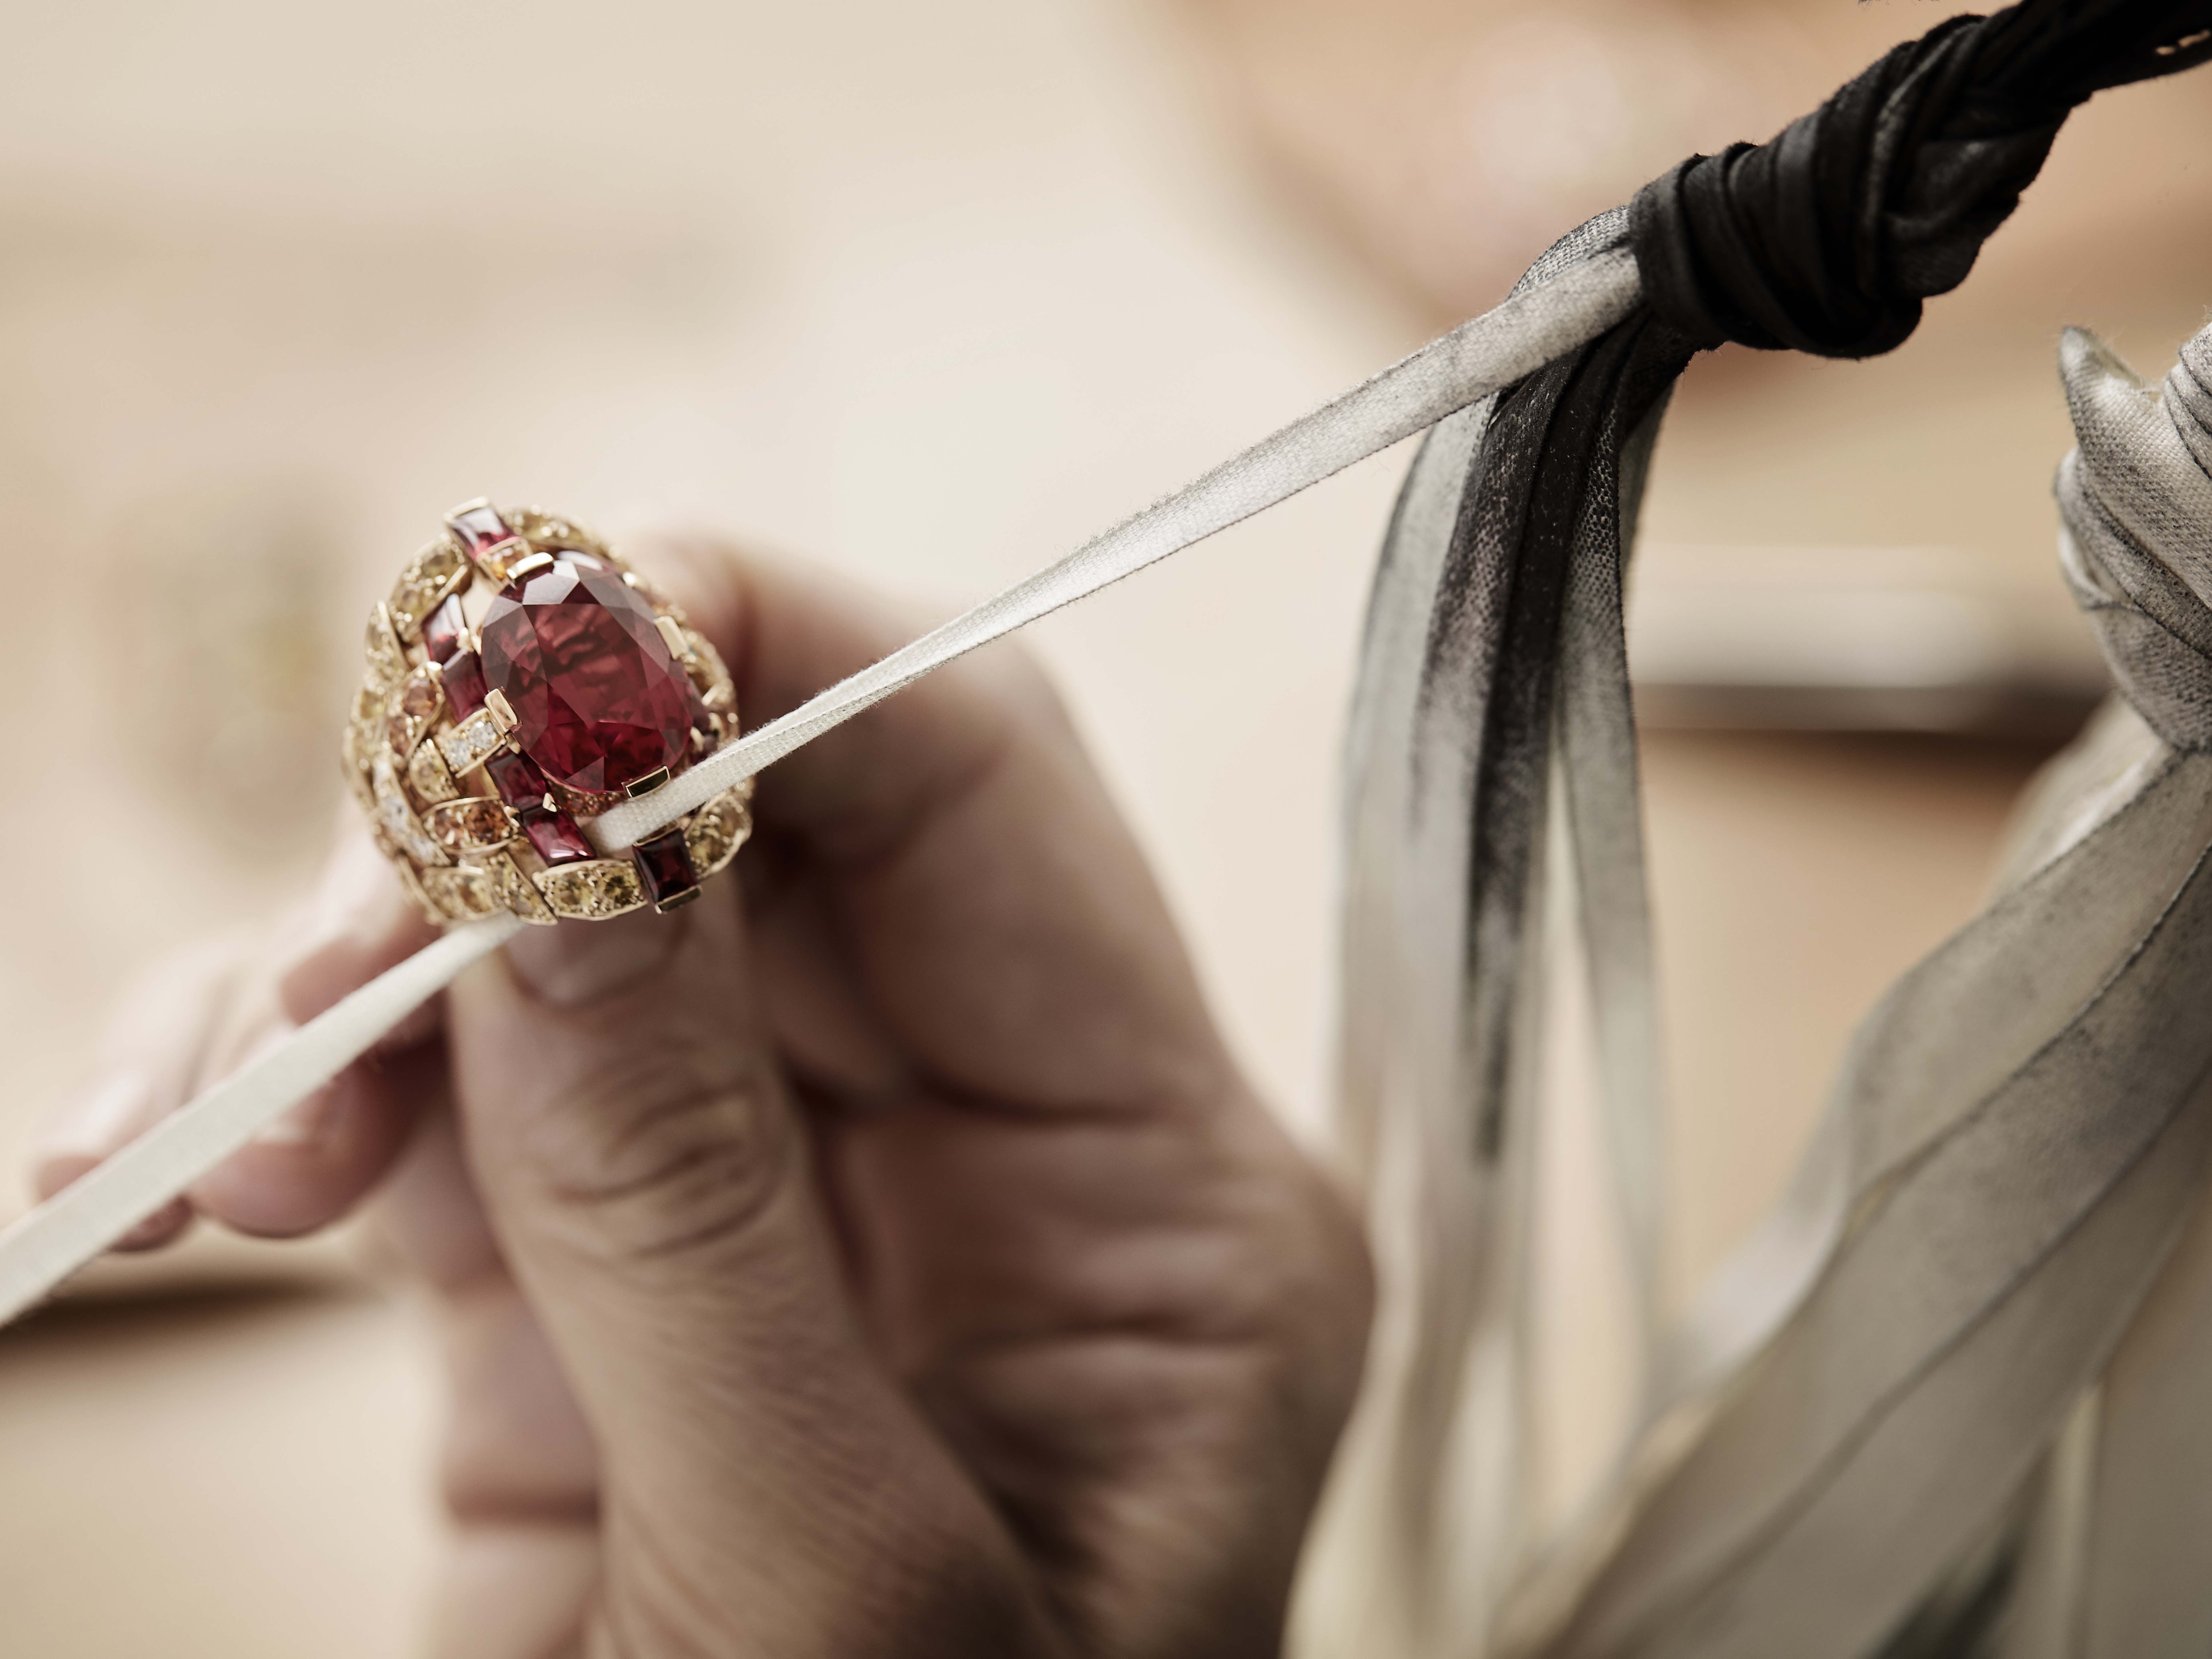 TWEED DE CHANEL” High Jewelry collection in London - ZOE Magazine